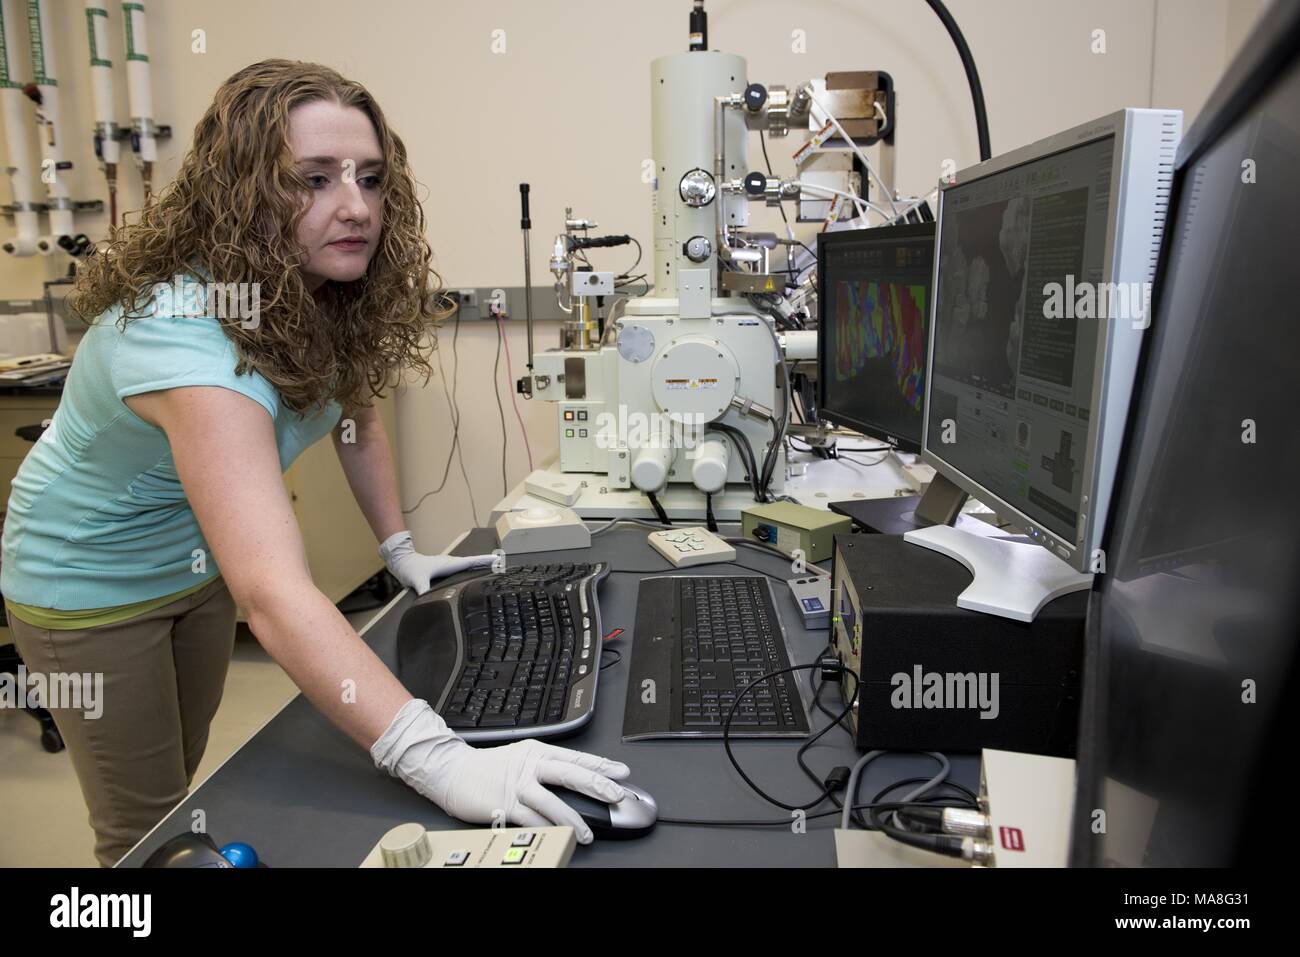 Female researcher uses a Scanning Electron Microscope (SEM) to perform high-resolution, electron microscopy studies of structural materials, in a lab located at Pacific Northwest National Laboratory (PNNL) located in Richland, Washington, image courtesy of the US Department of Energy, November 15, 2016. () Stock Photo